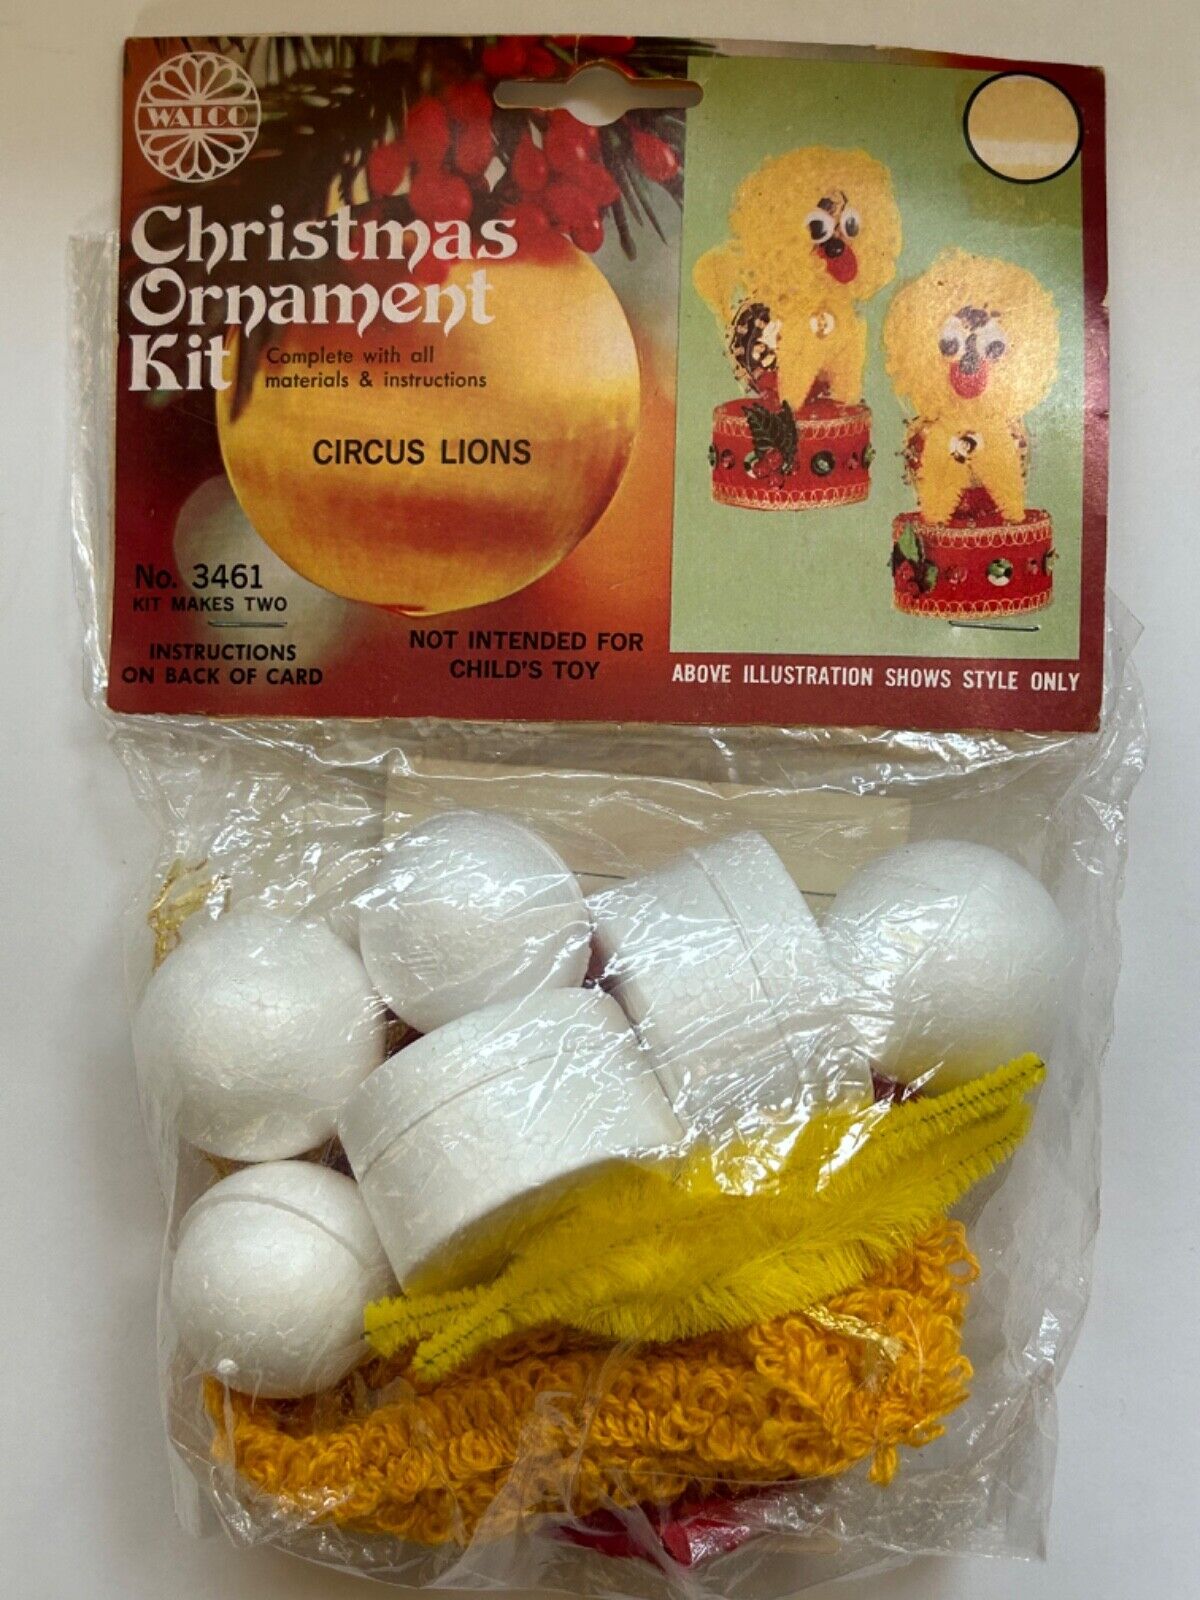 Vintage Walco Christmas Ornament Kit, 1977, Circus Lions, Pre-Owned